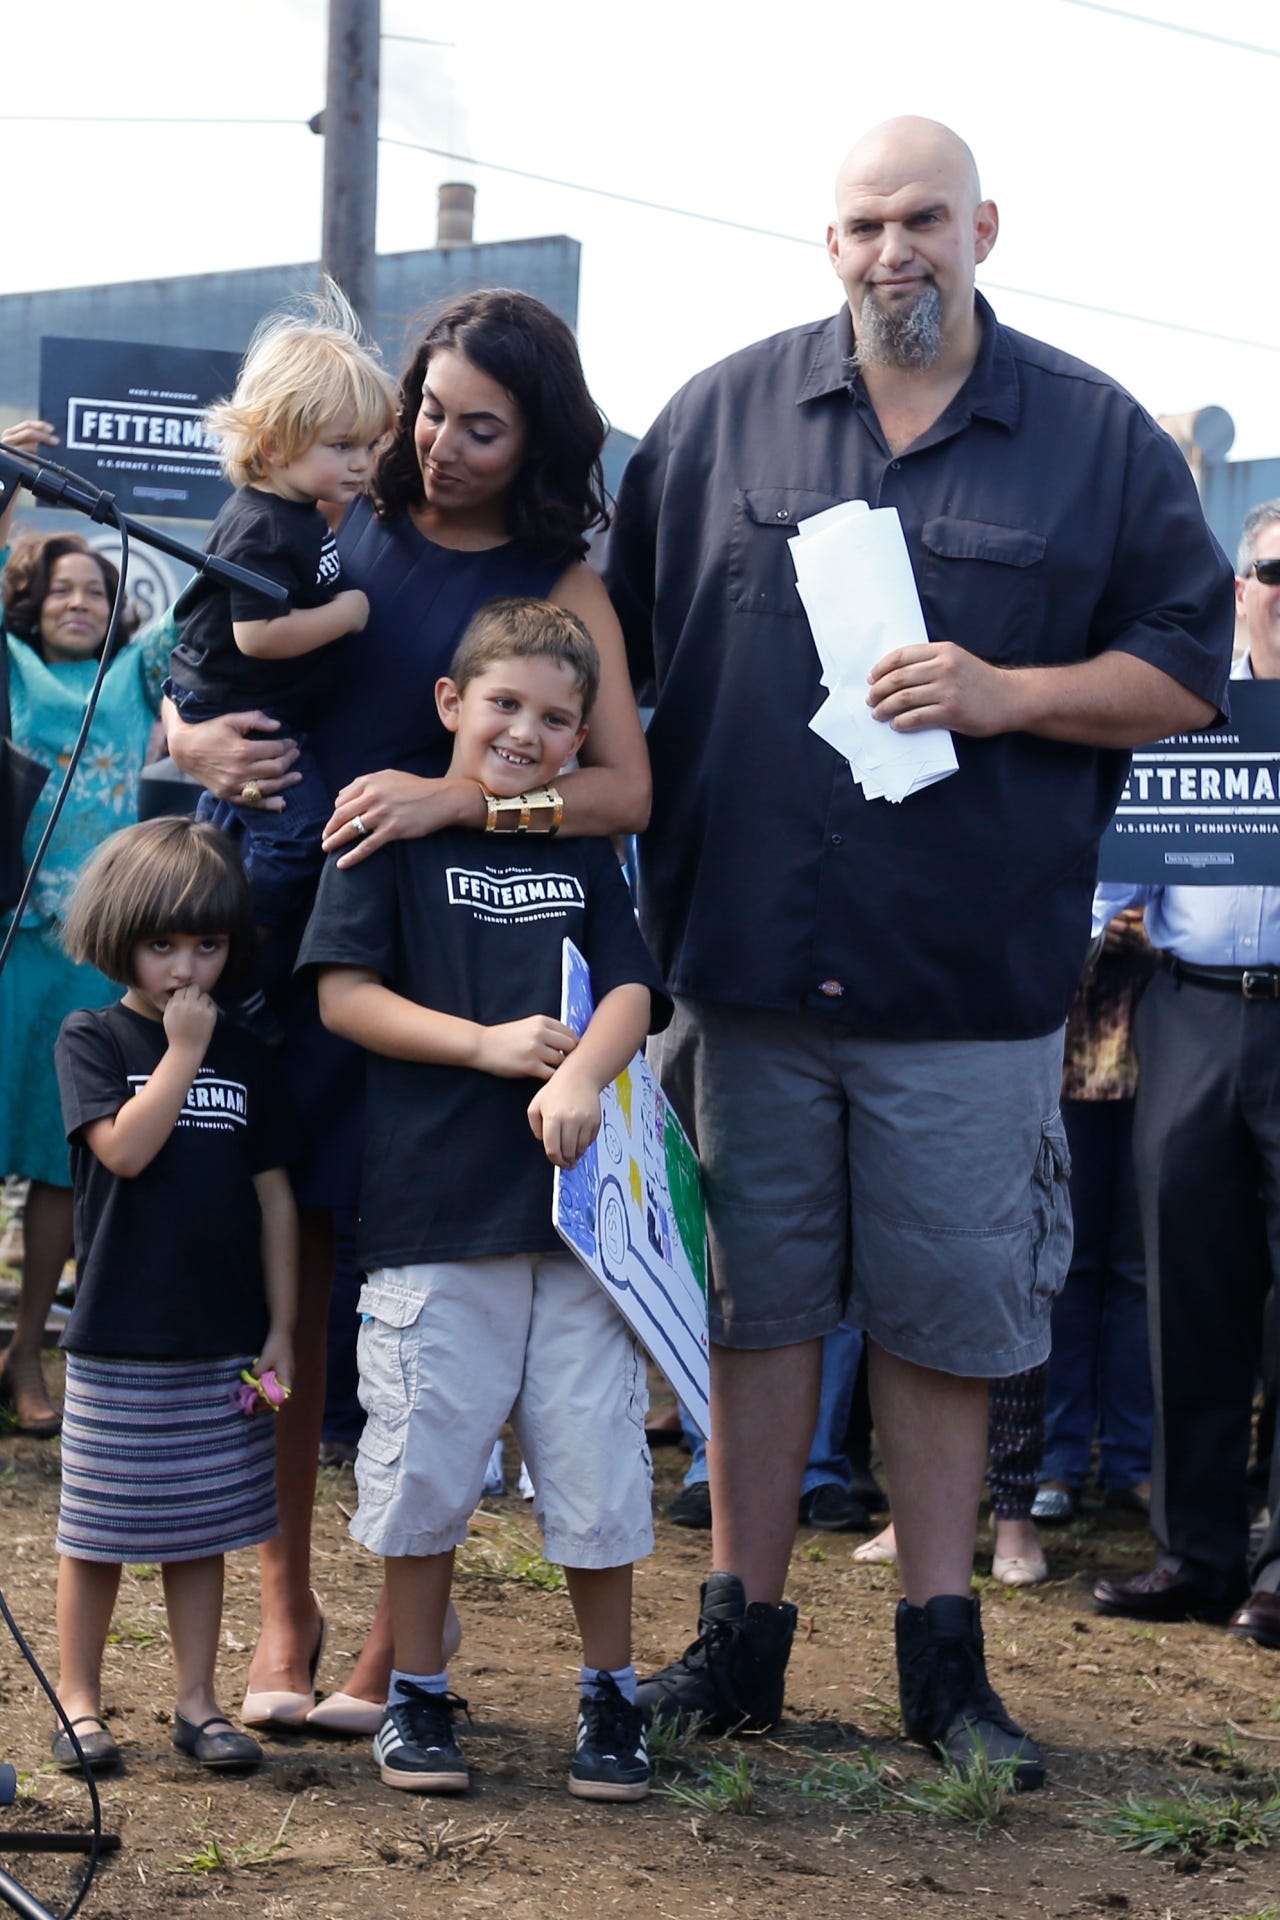 Fetterman family opts for amnesty following verbal assault incident | ABC27